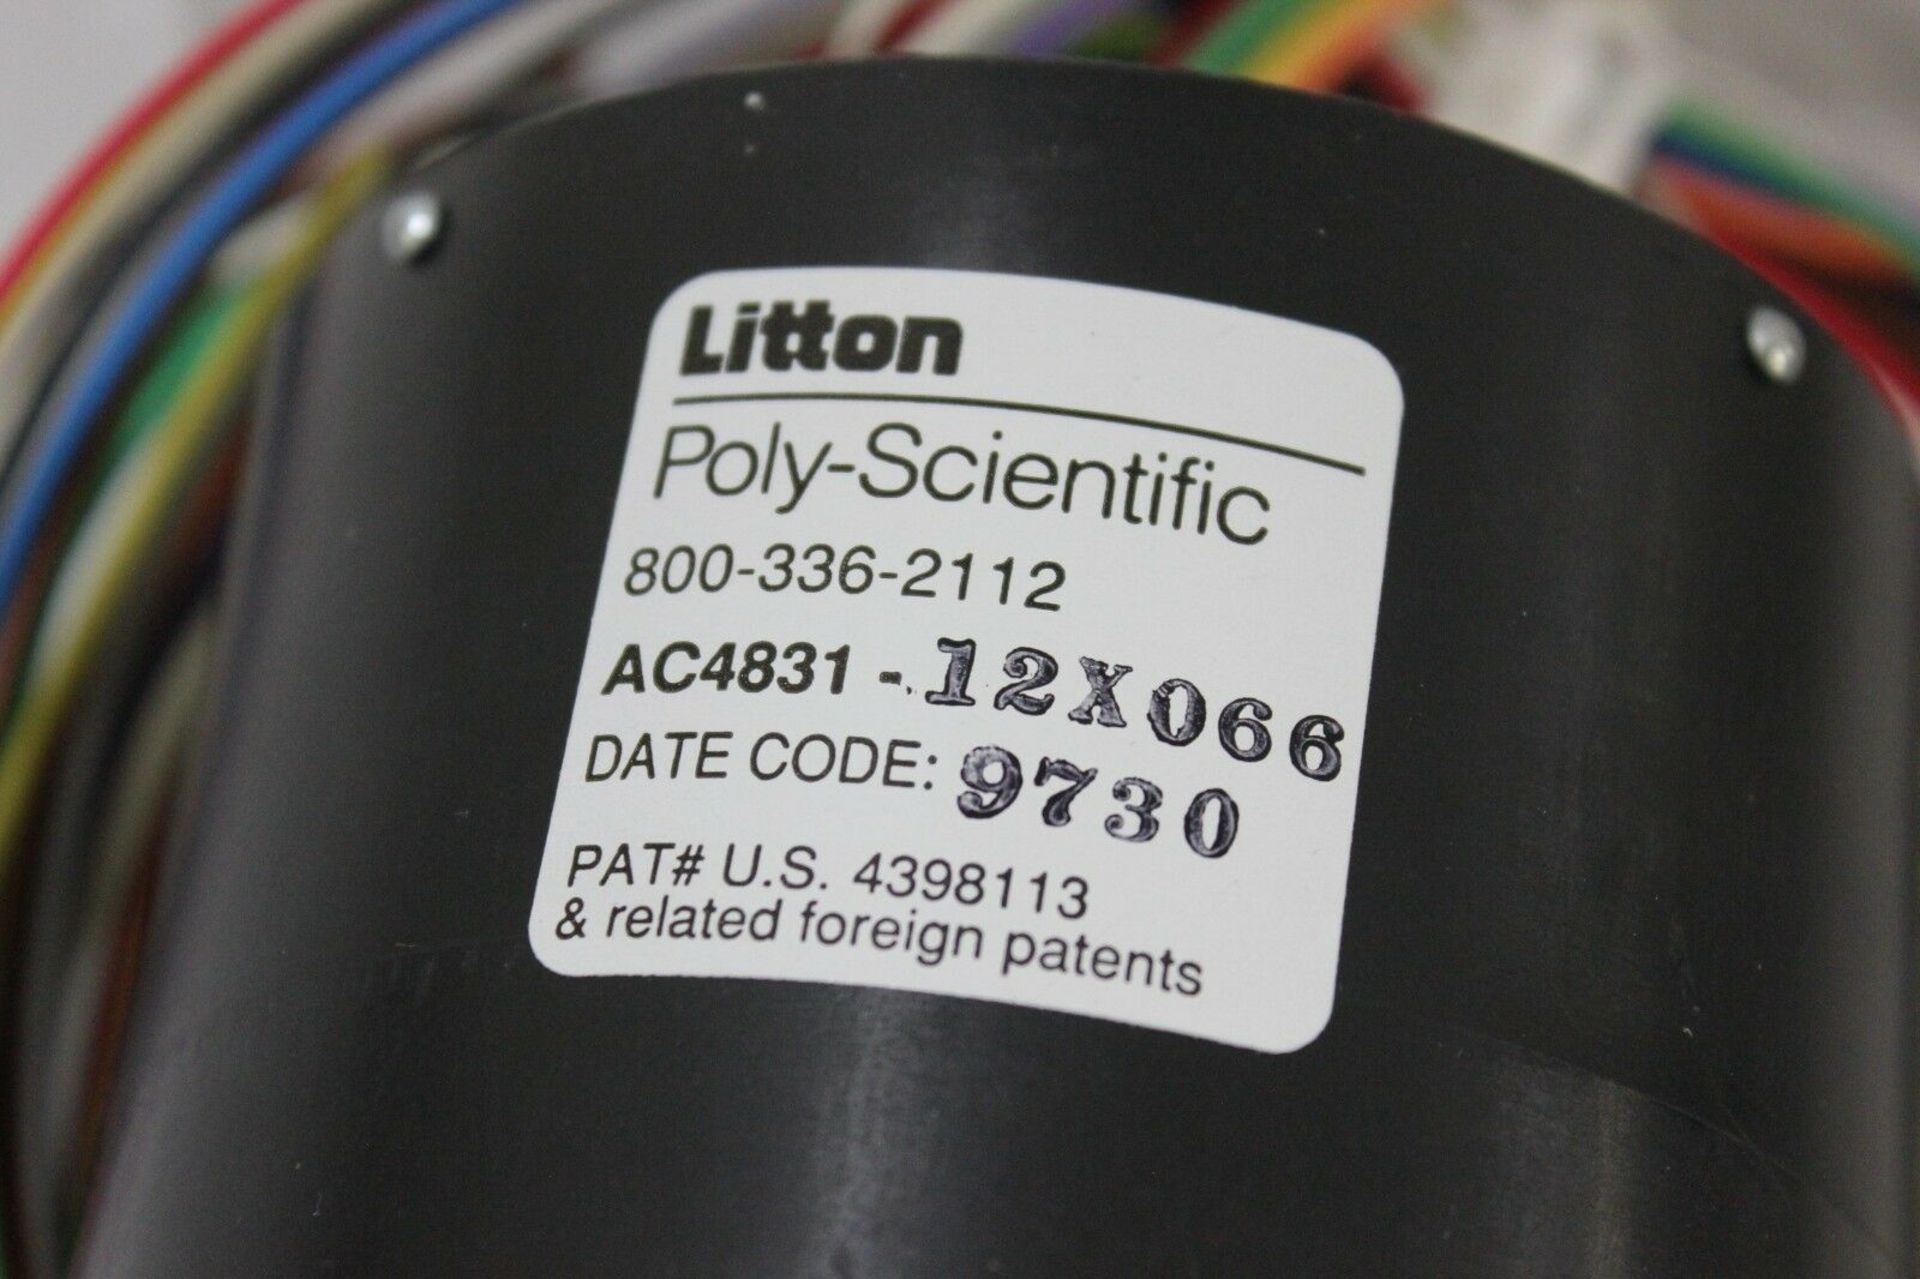 New Litton Poly Scientific 12 Way Slip Ring Slipring Assembly - Image 4 of 5